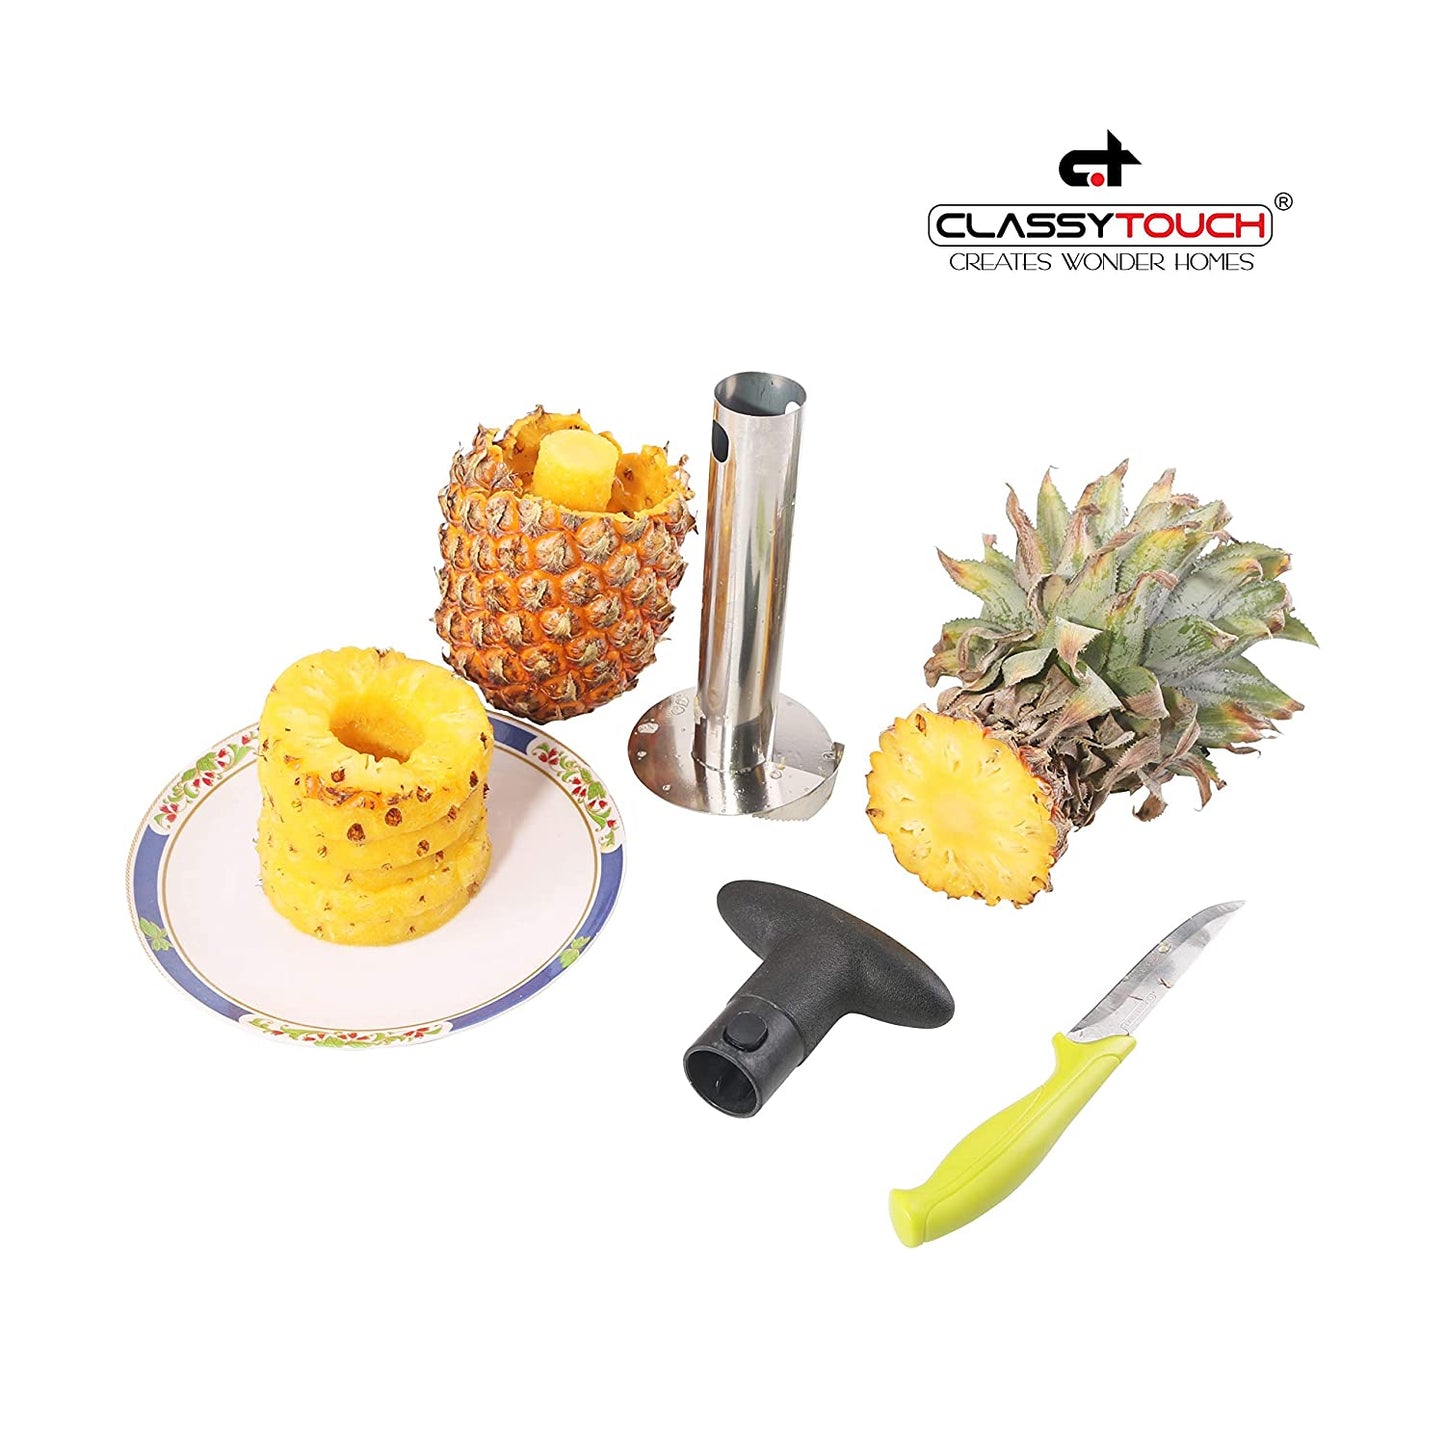 Classy Touch Pineapple Corer with Slicer | 1 Pc